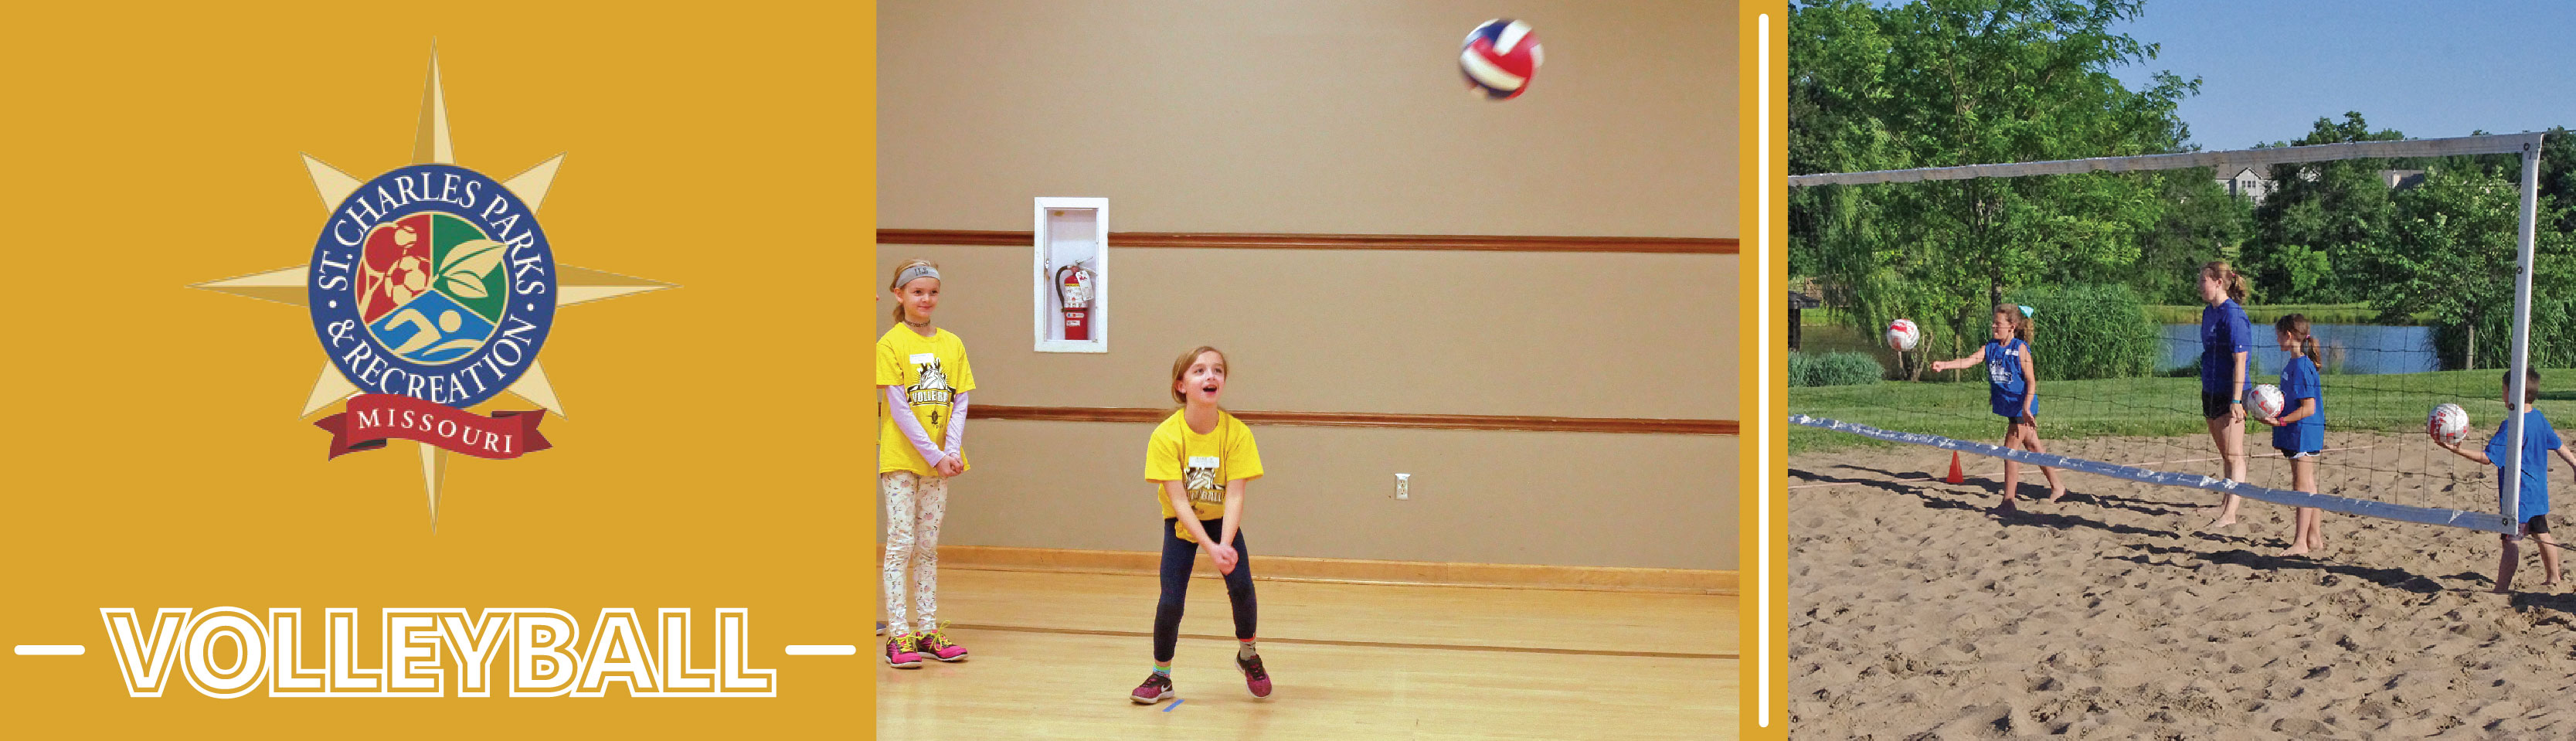 Image of kids playing volleyball